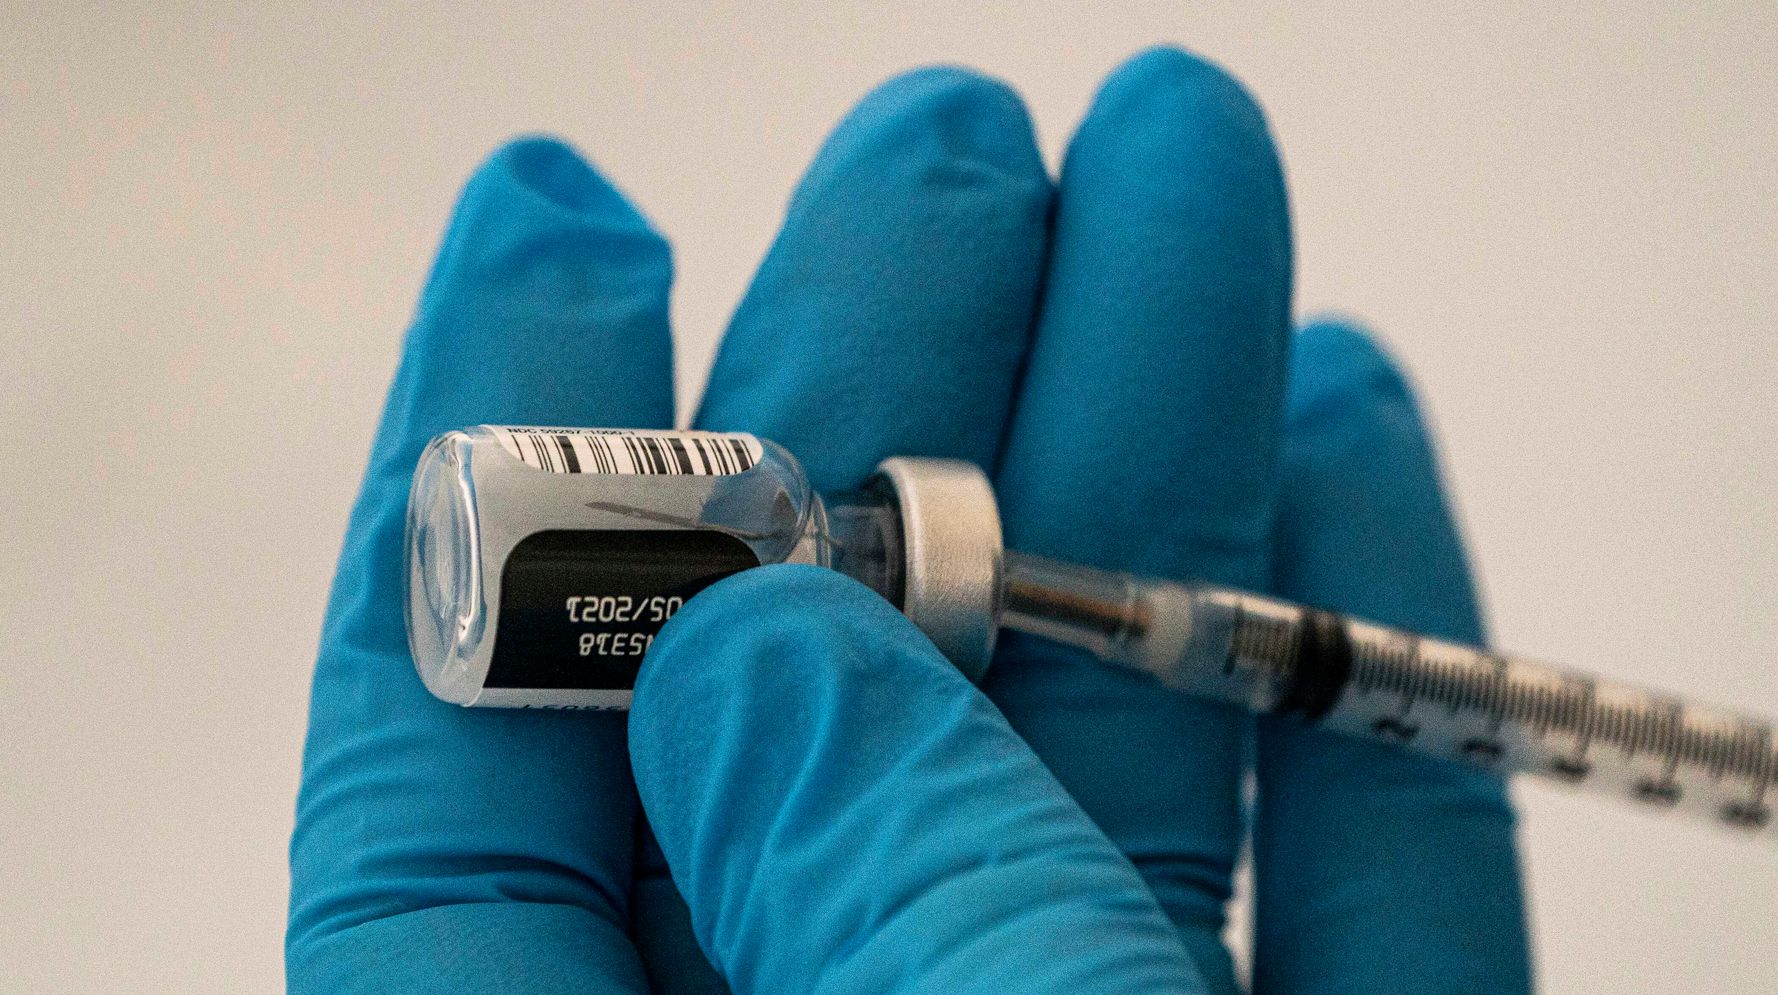 Washington Governor Mandates Vaccines For All School Employees; Strictest Rule In U.S.